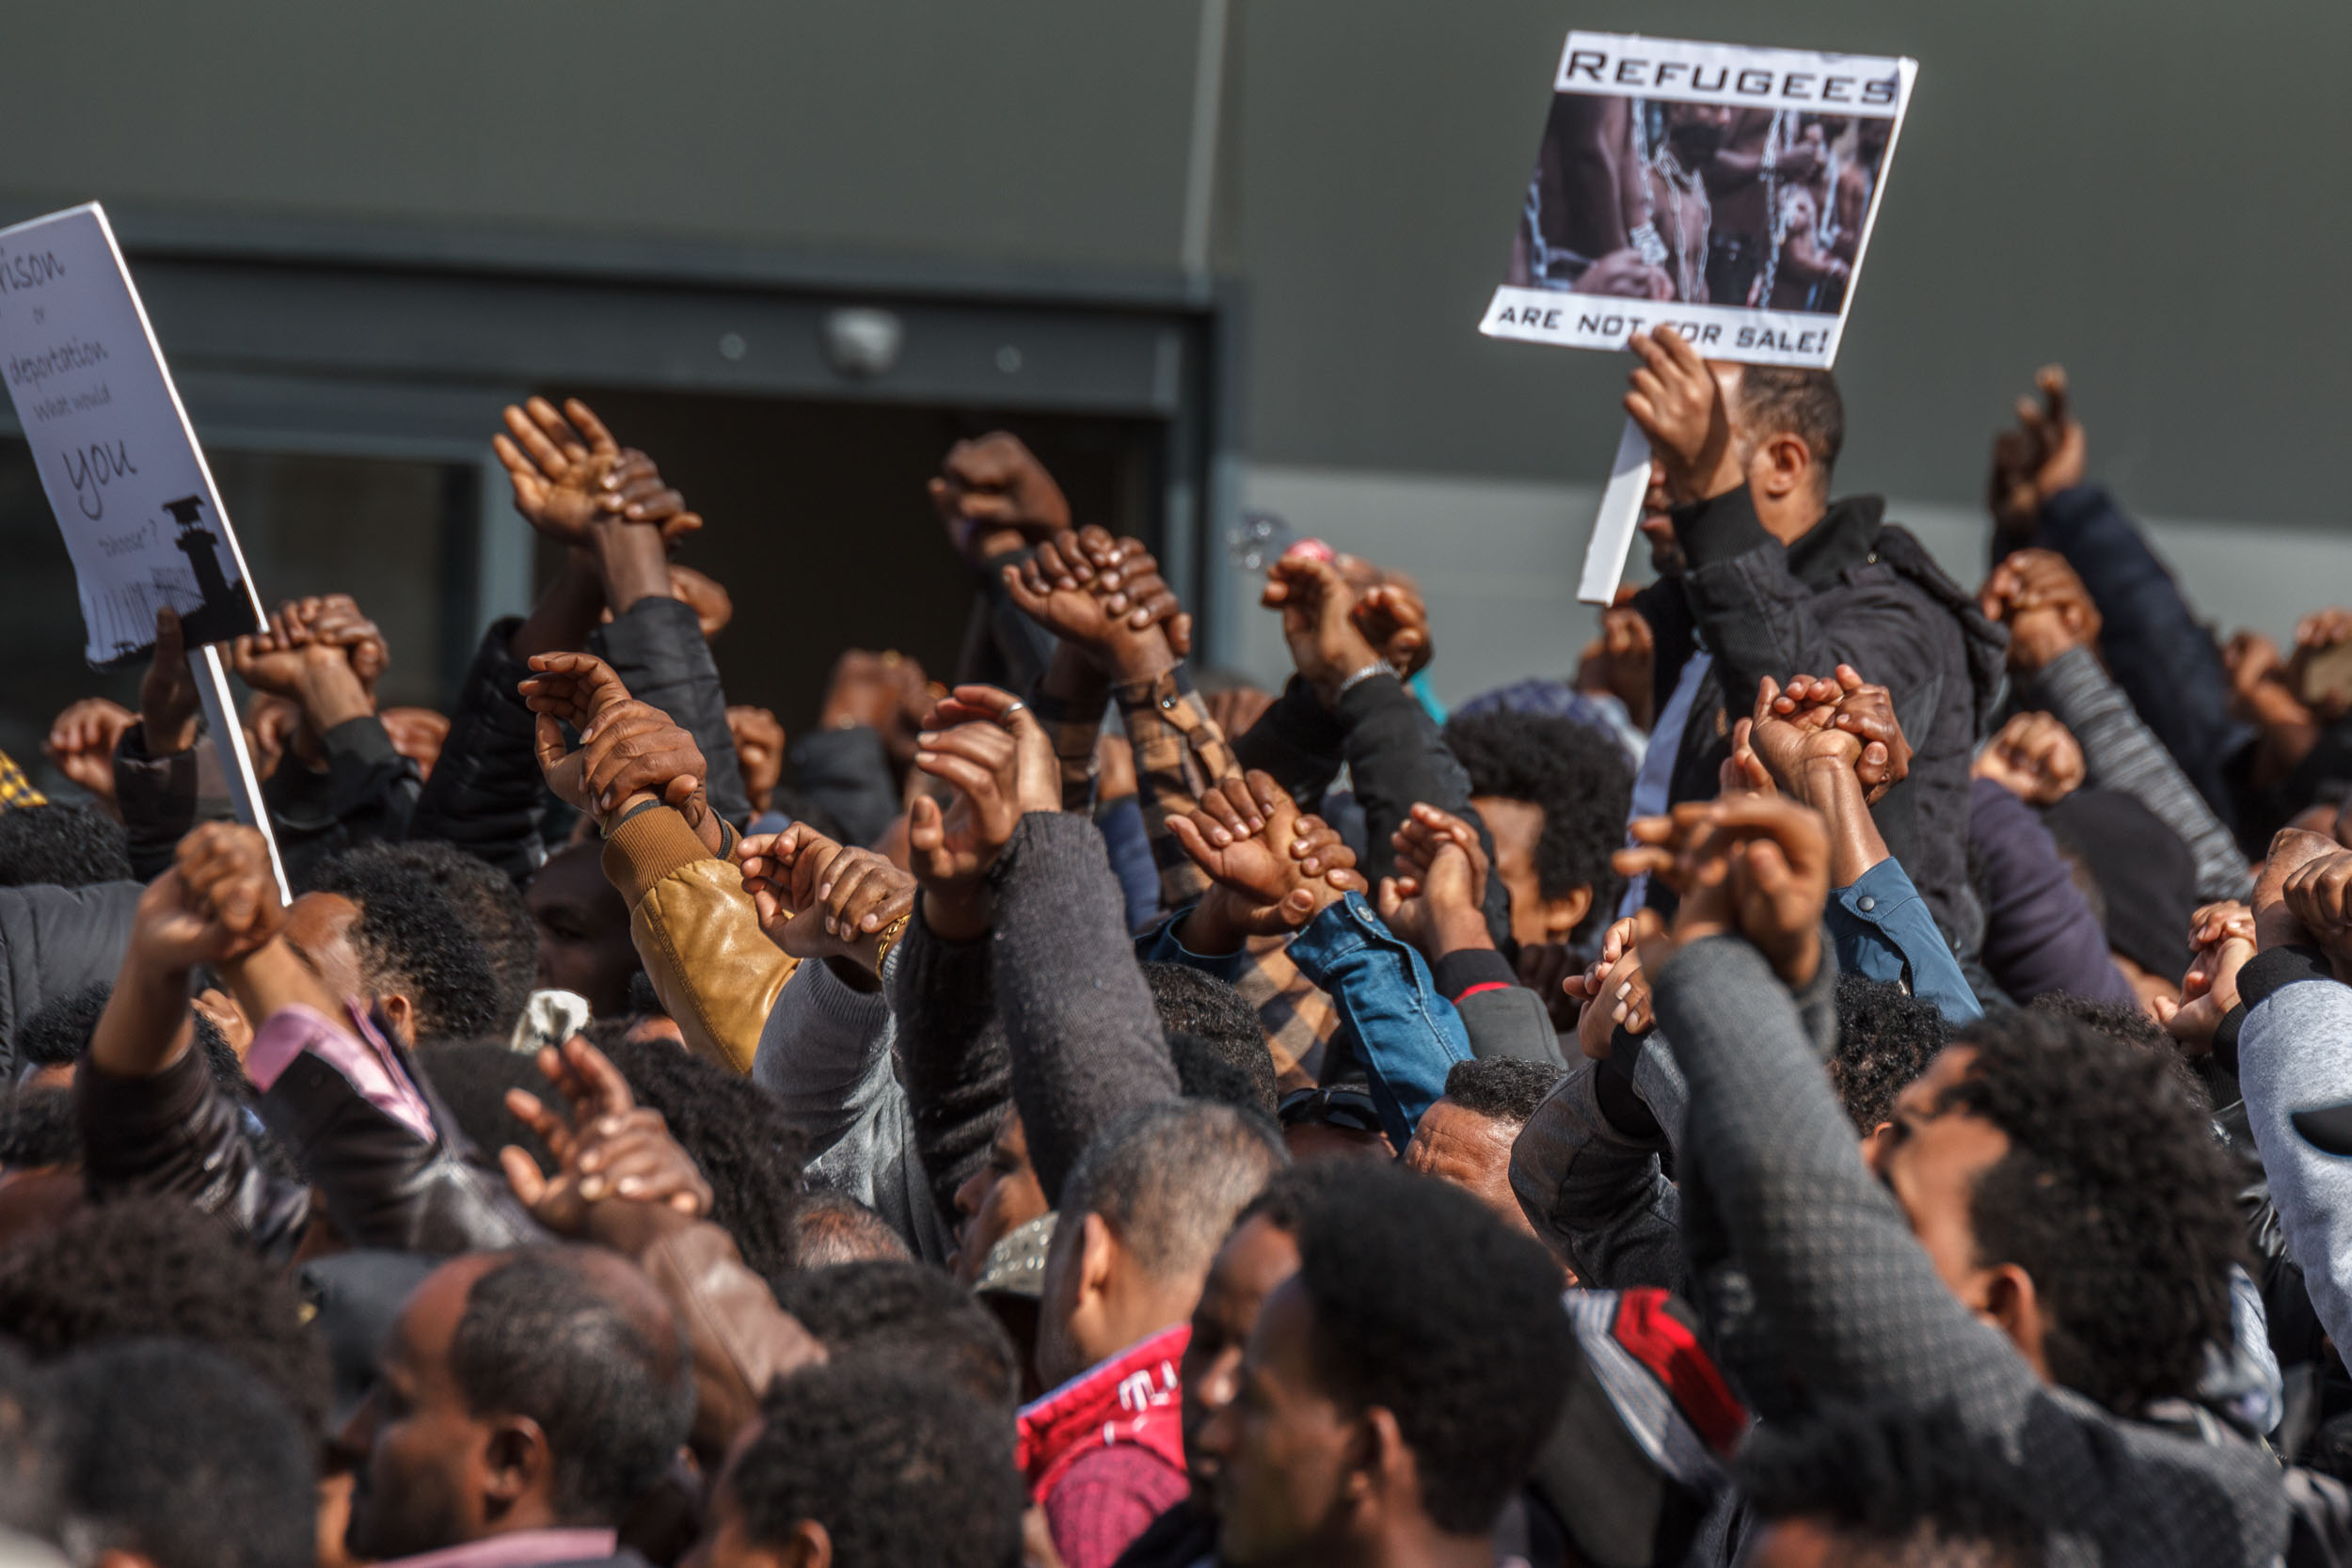 Israel, January 2018 - Illegal immigrants and asylum seekers from Africa protest the decision to expel them back